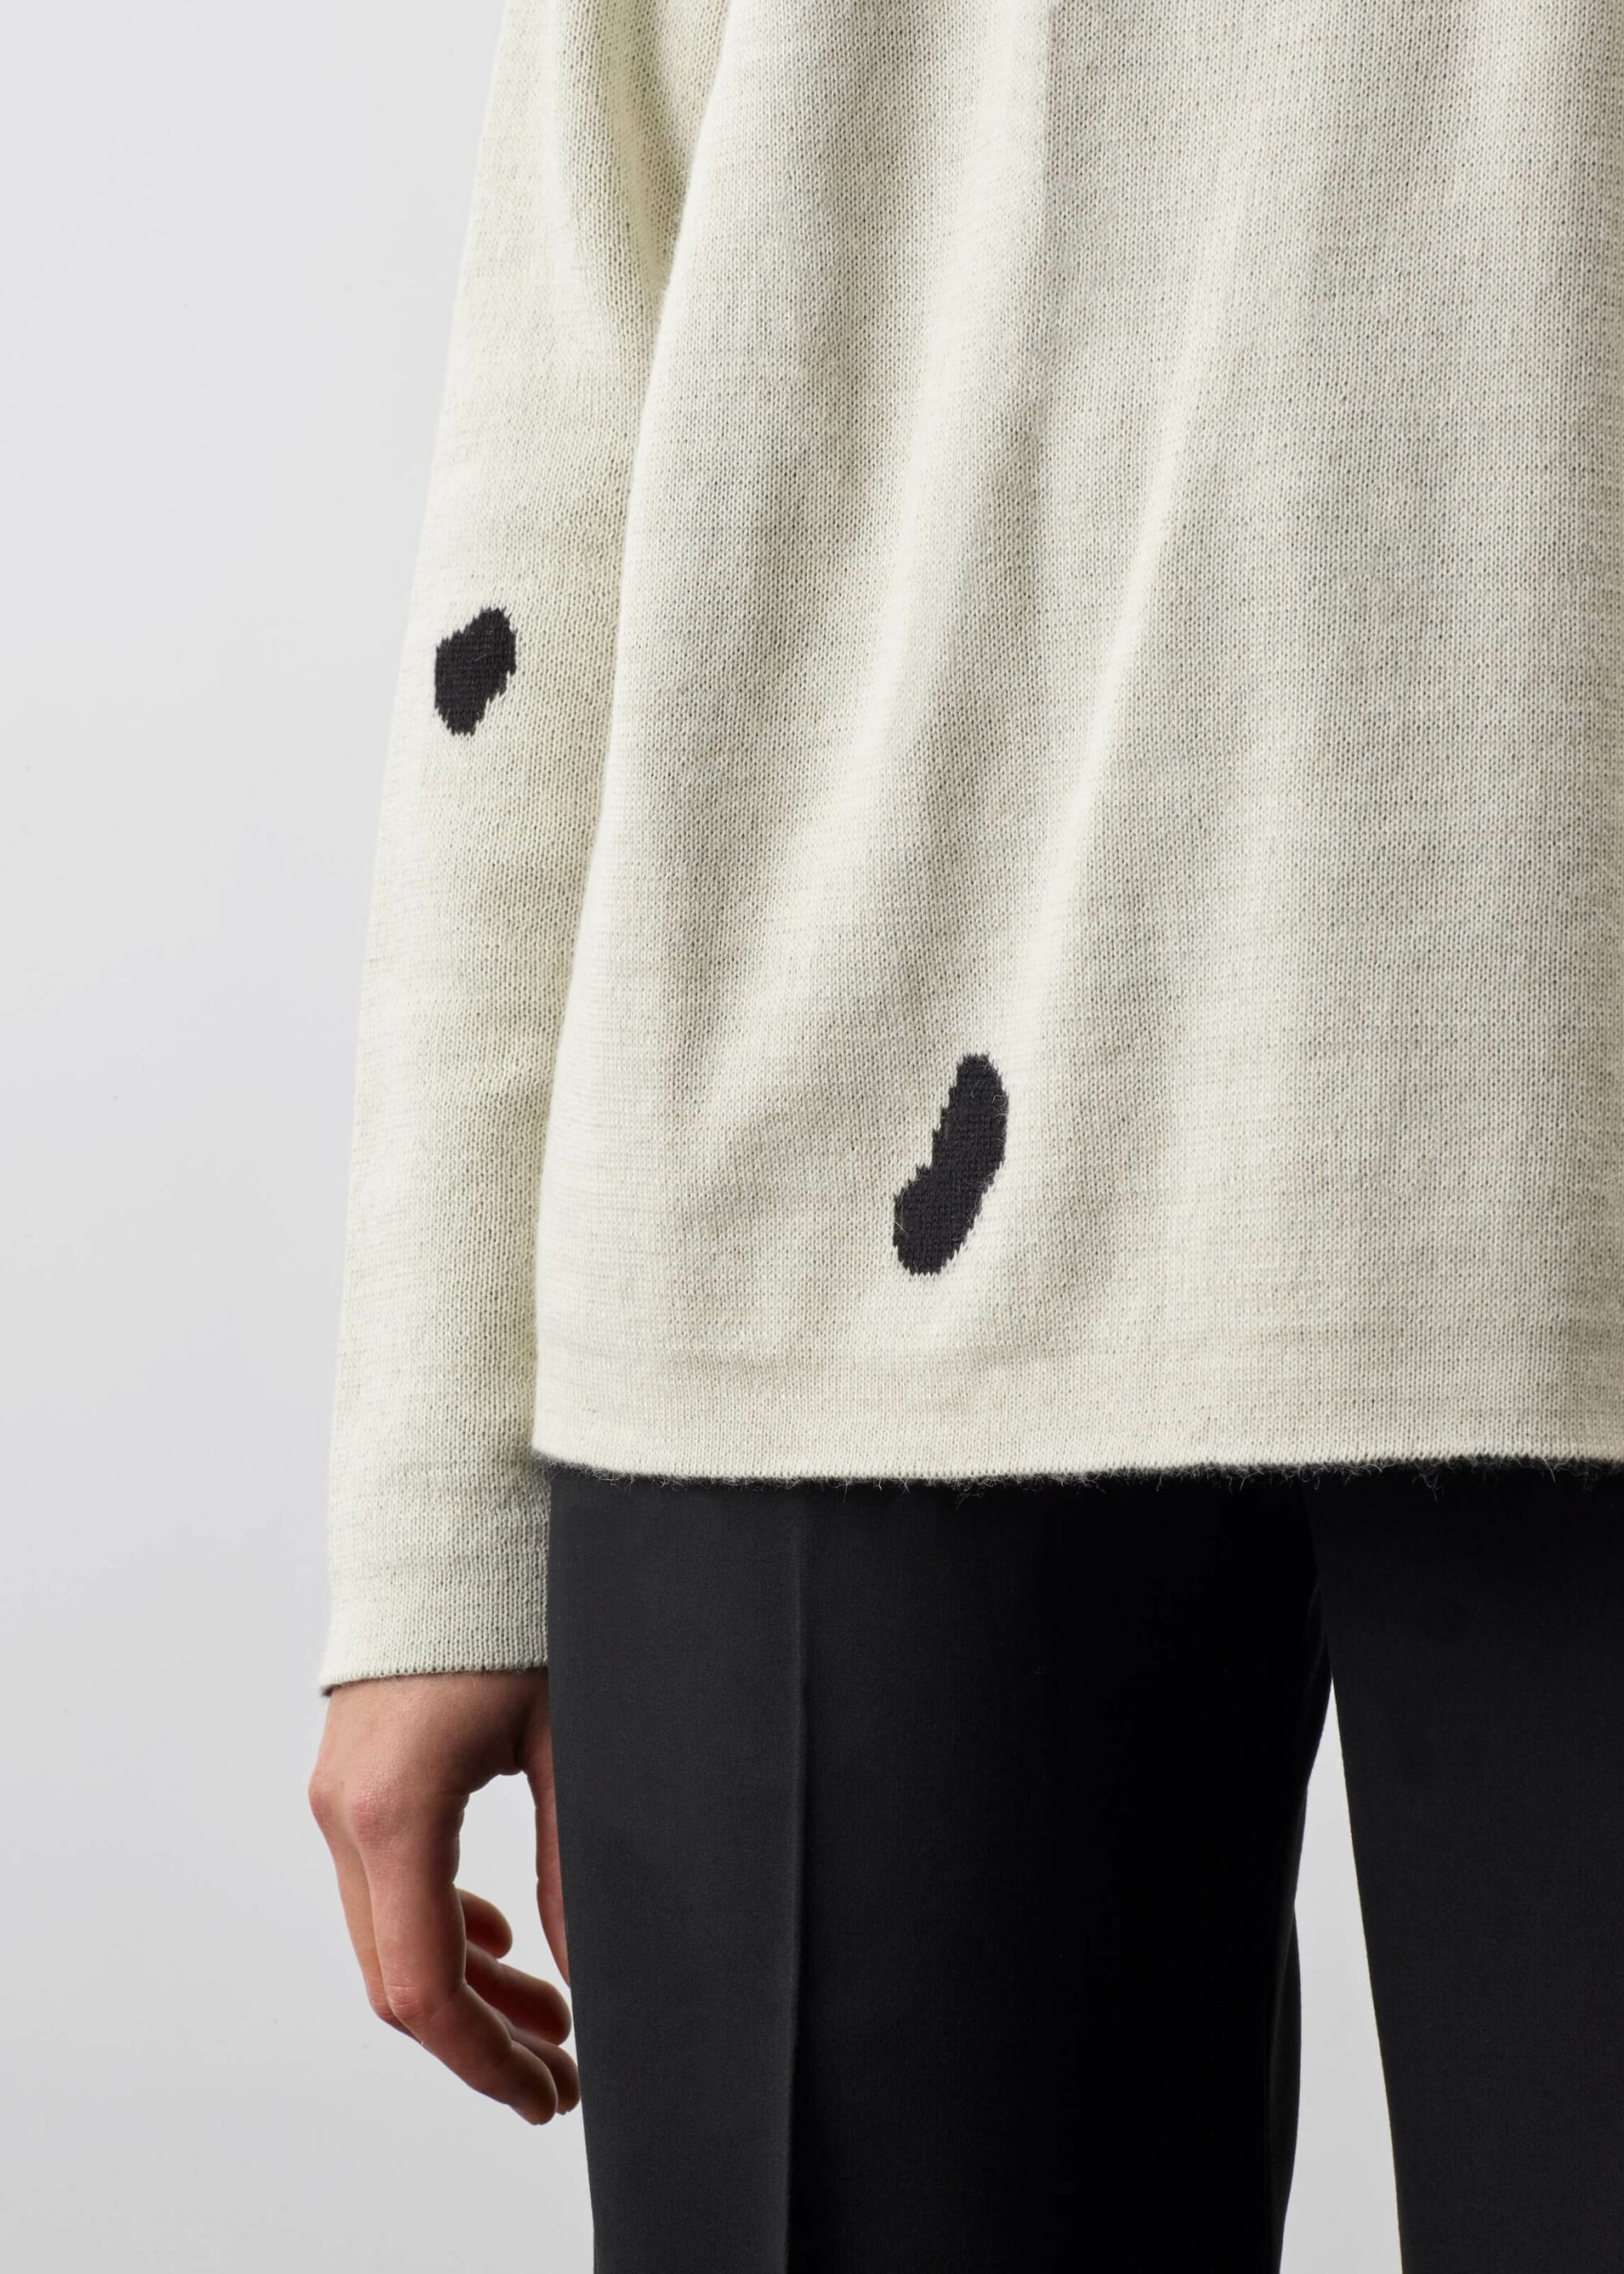 Product image for »Ermine« Jacquard Sweater Baby Alpaca